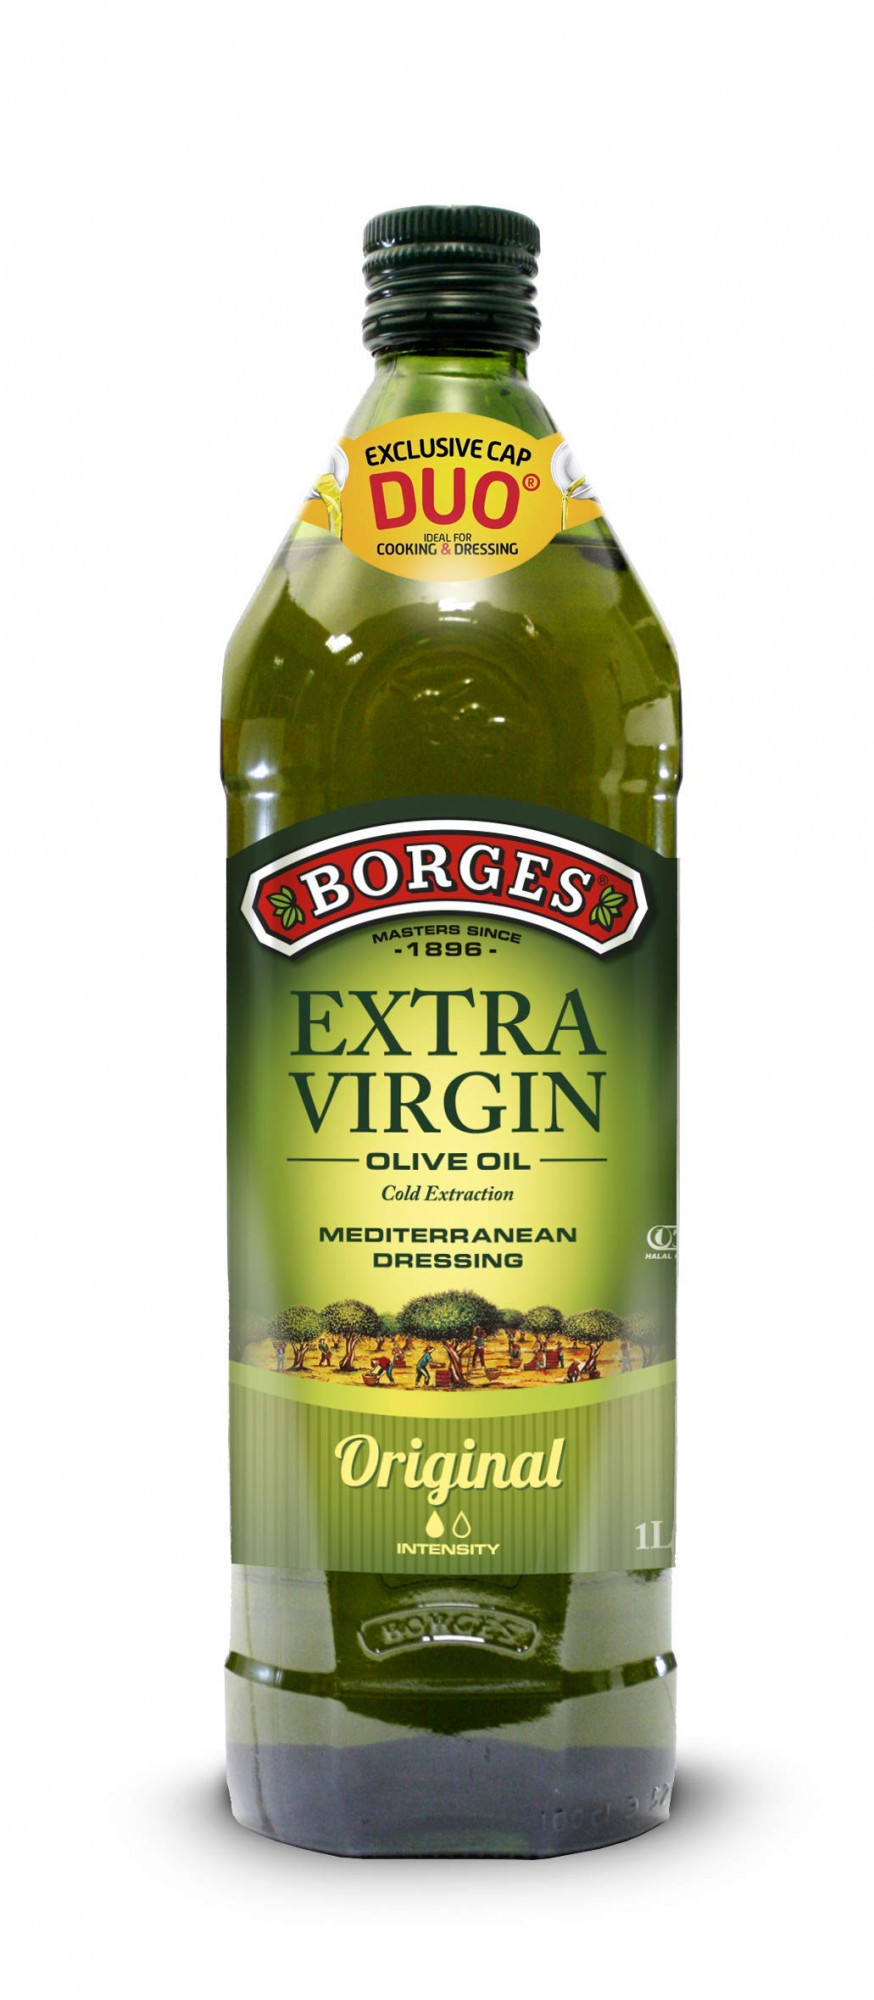 Borges Extra Virgin Olive Oil -1L Glass & Unfiltered Organic Apple Cider Vinegar with Mother, 355ml